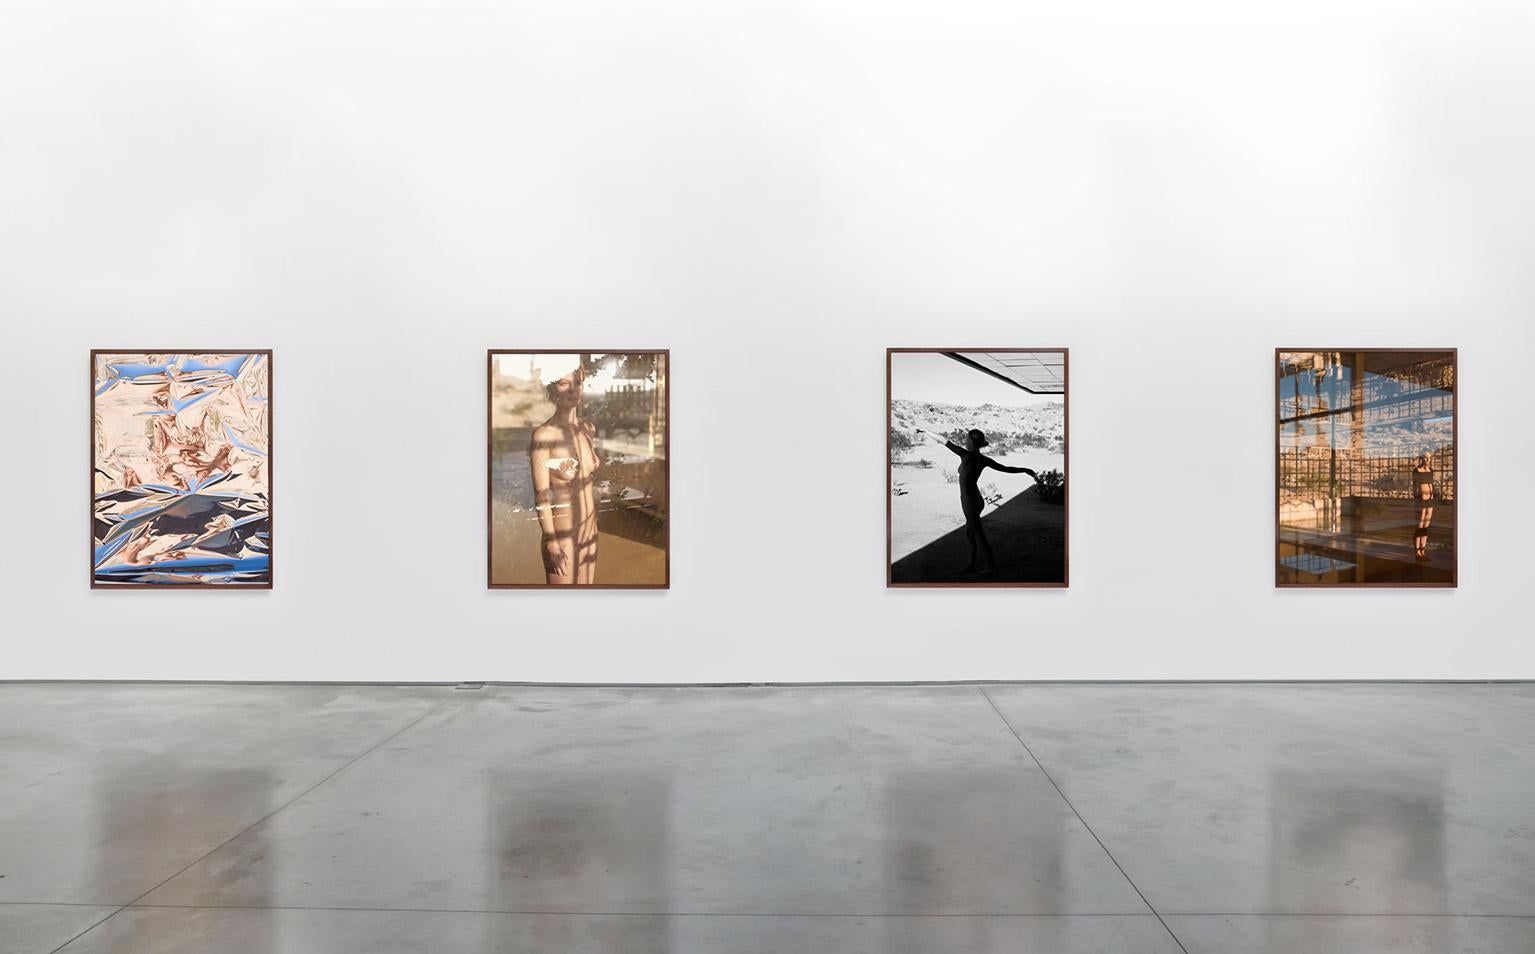 She Disappeared into Complete Silence (AD14558) - large abstract photograph - Photograph by Mona Kuhn